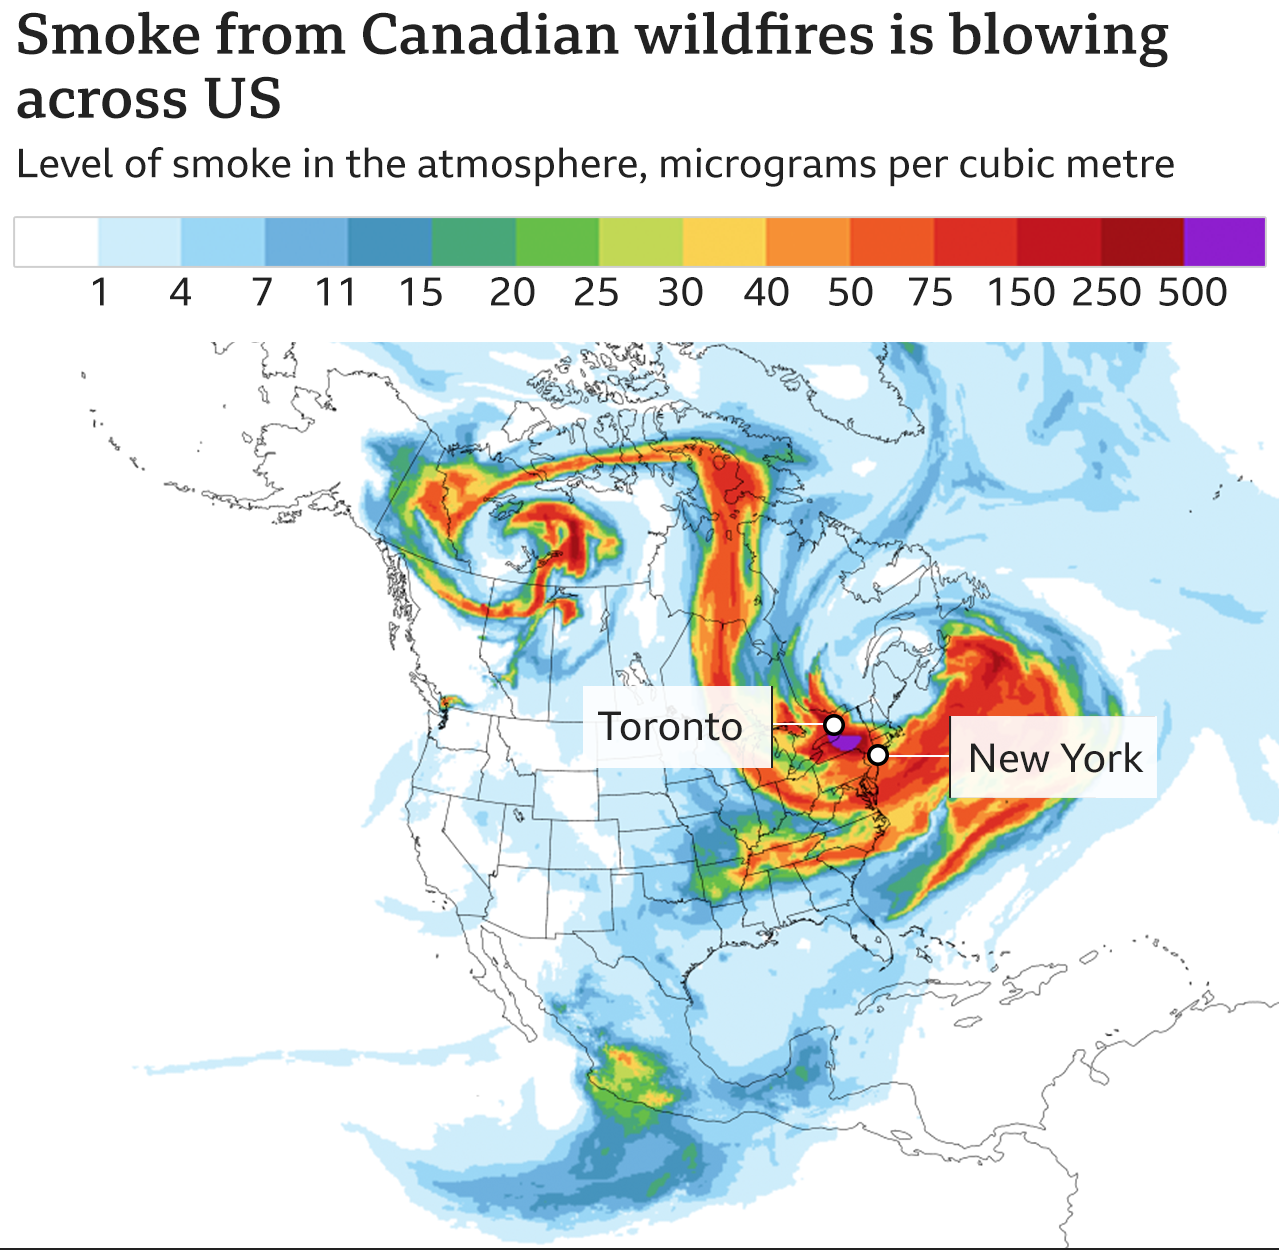 Graphic showing smoke clouds and air quality index ratings